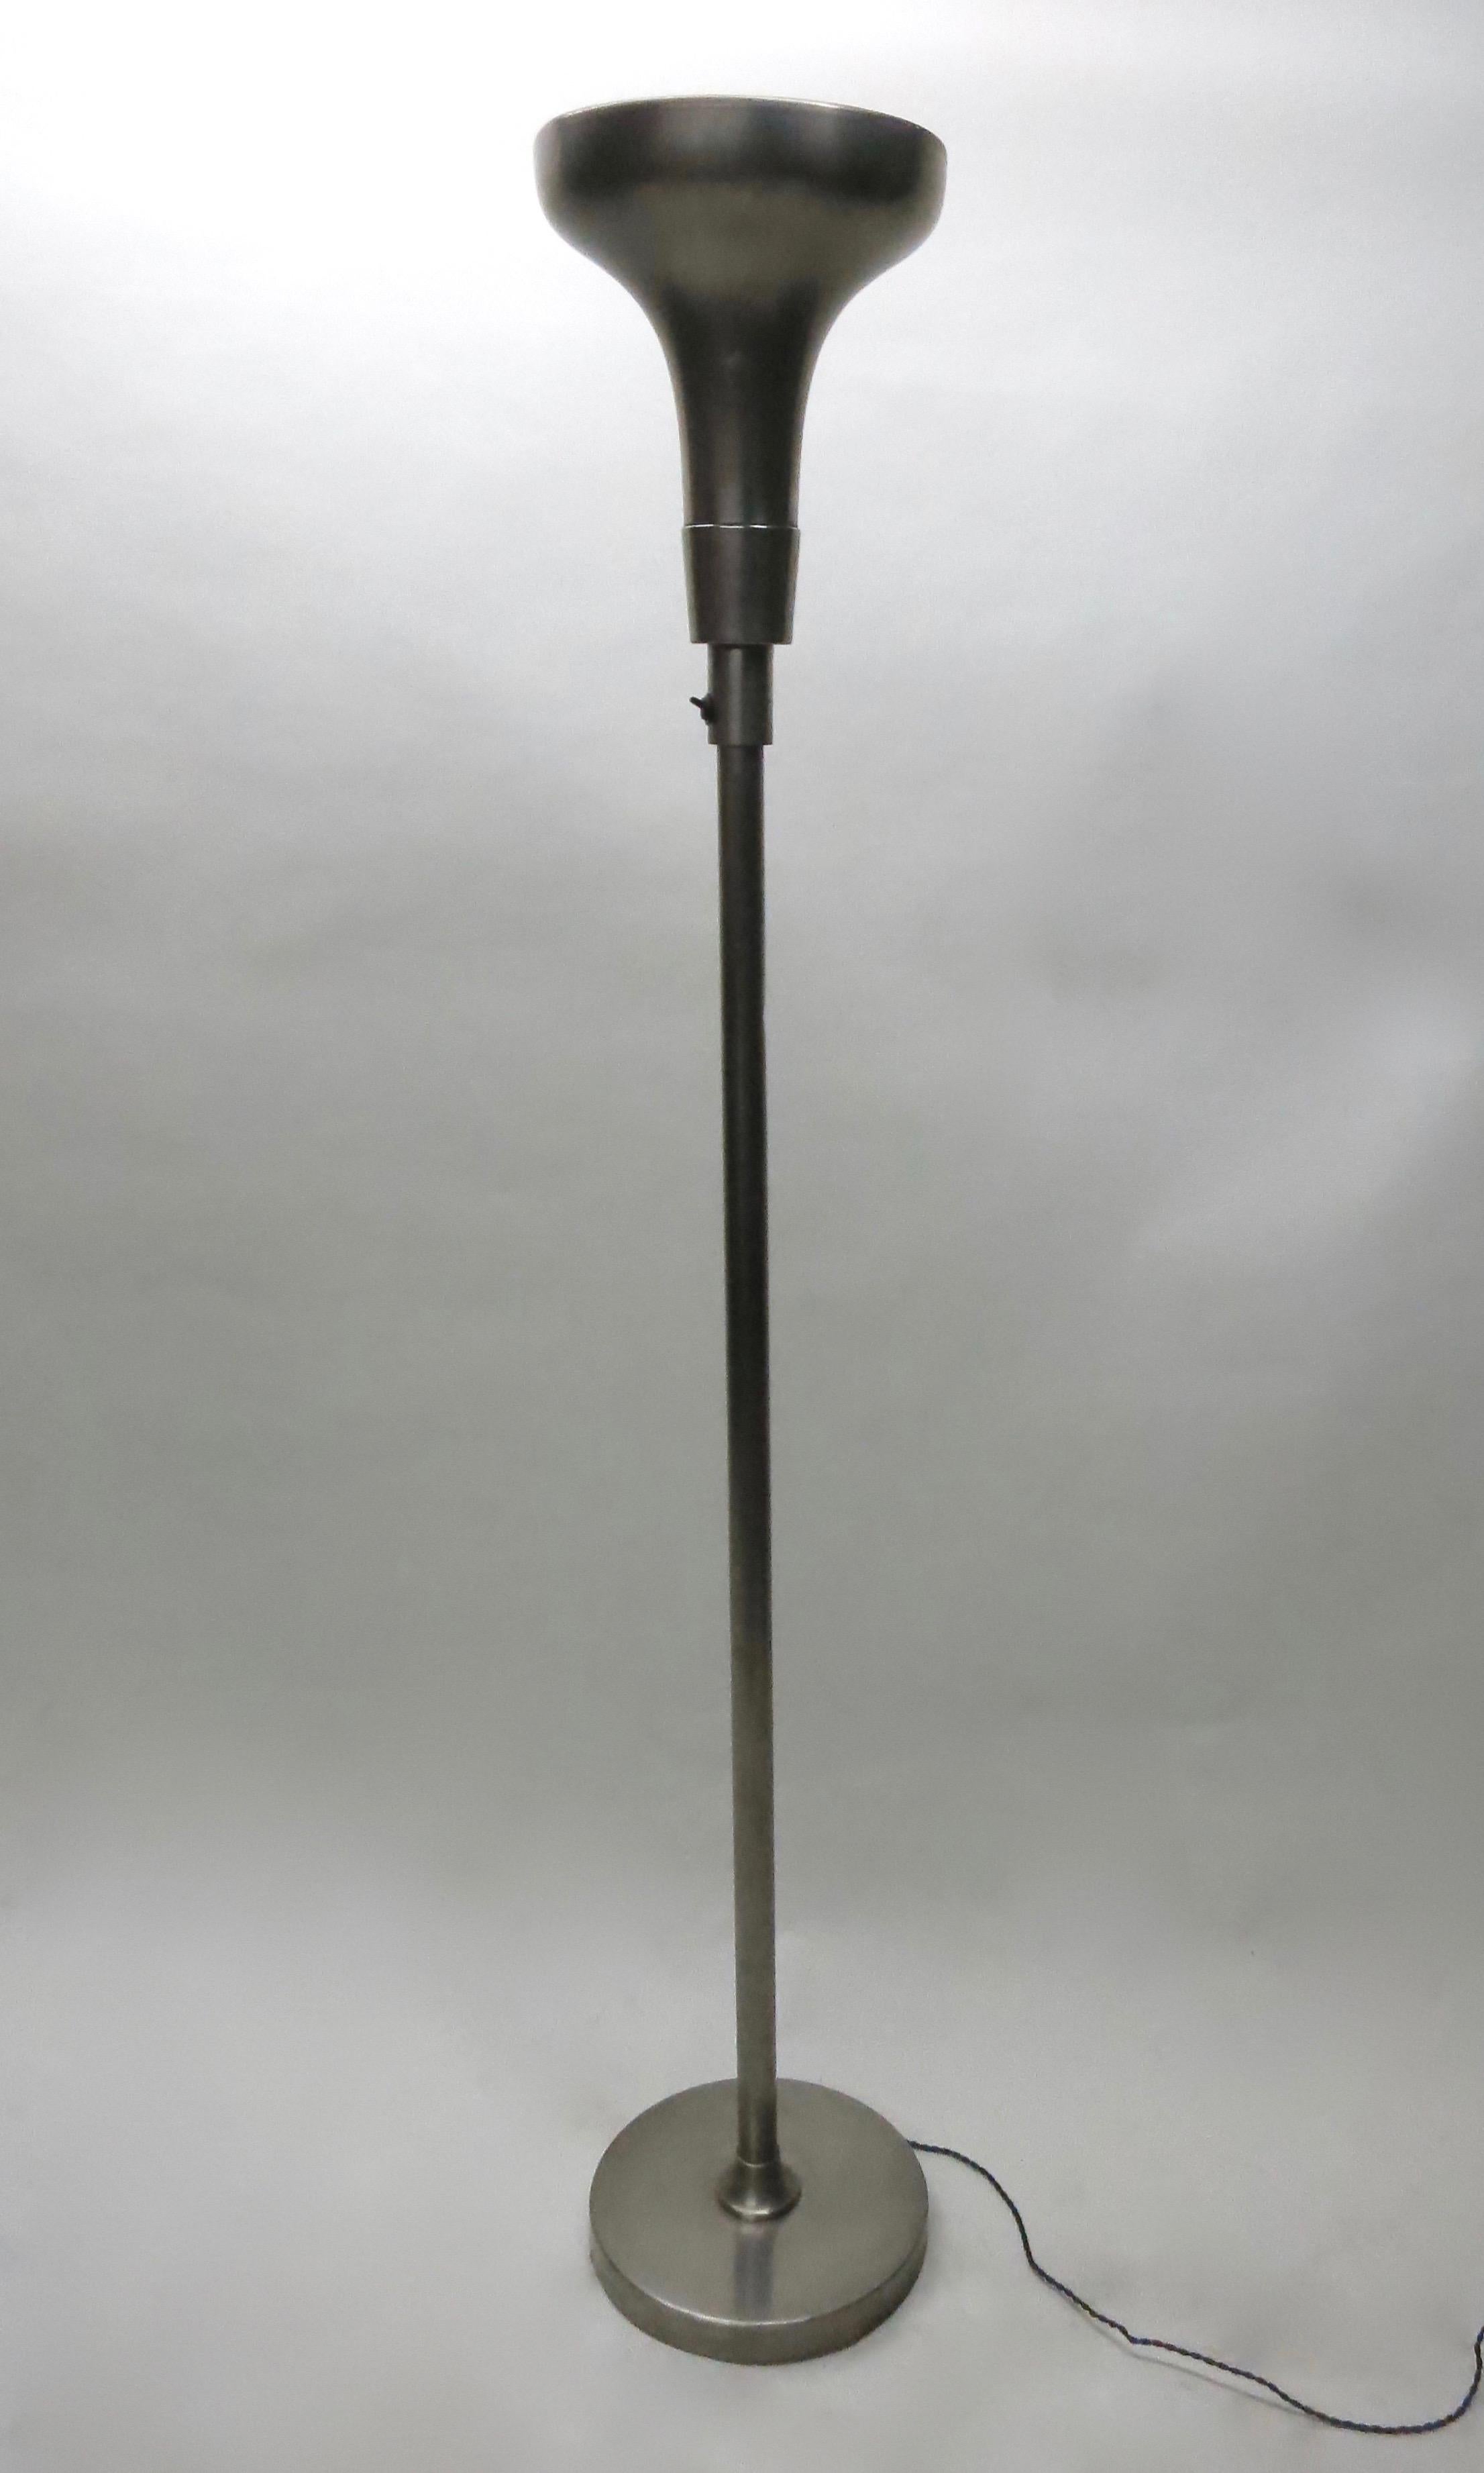 Deco floor lamp in nickel-plated copper and steel with a round base, and a tubular stem that connects to the torchiere shade that encompasses a single light socket. The black flip switch is located below the bottom portion of the shade's perforated